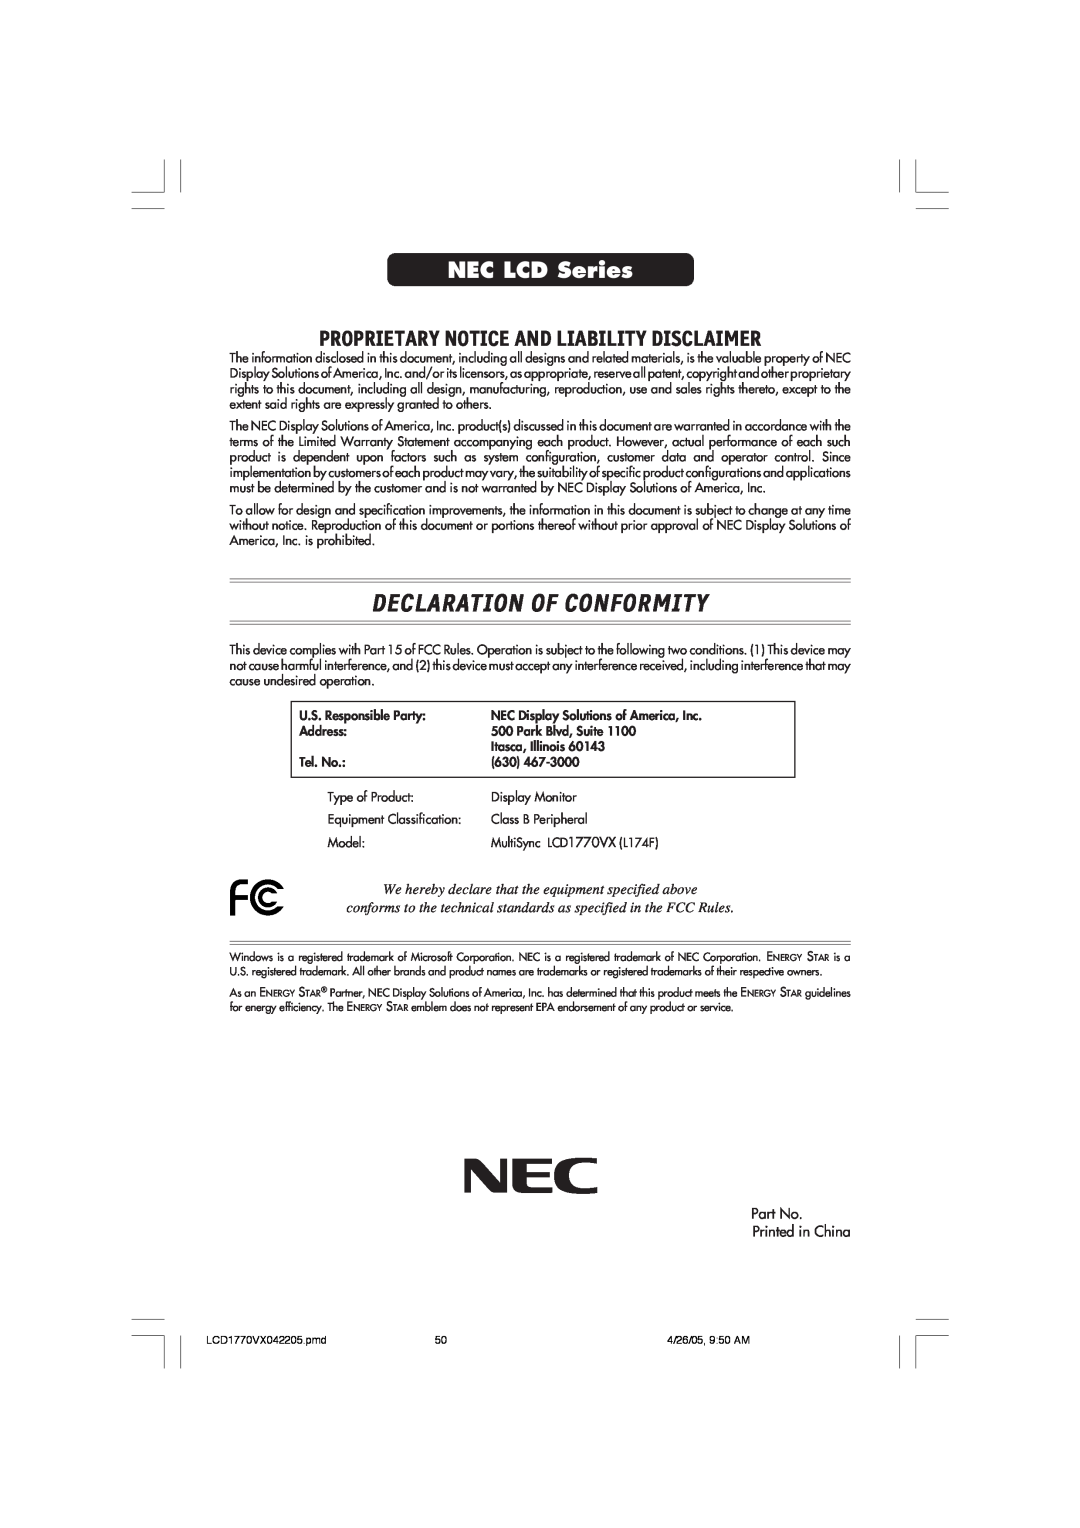 NEC LCD1770VX user manual Declaration Of Conformity, NEC LCD Series, Proprietary Notice And Liability Disclaimer 